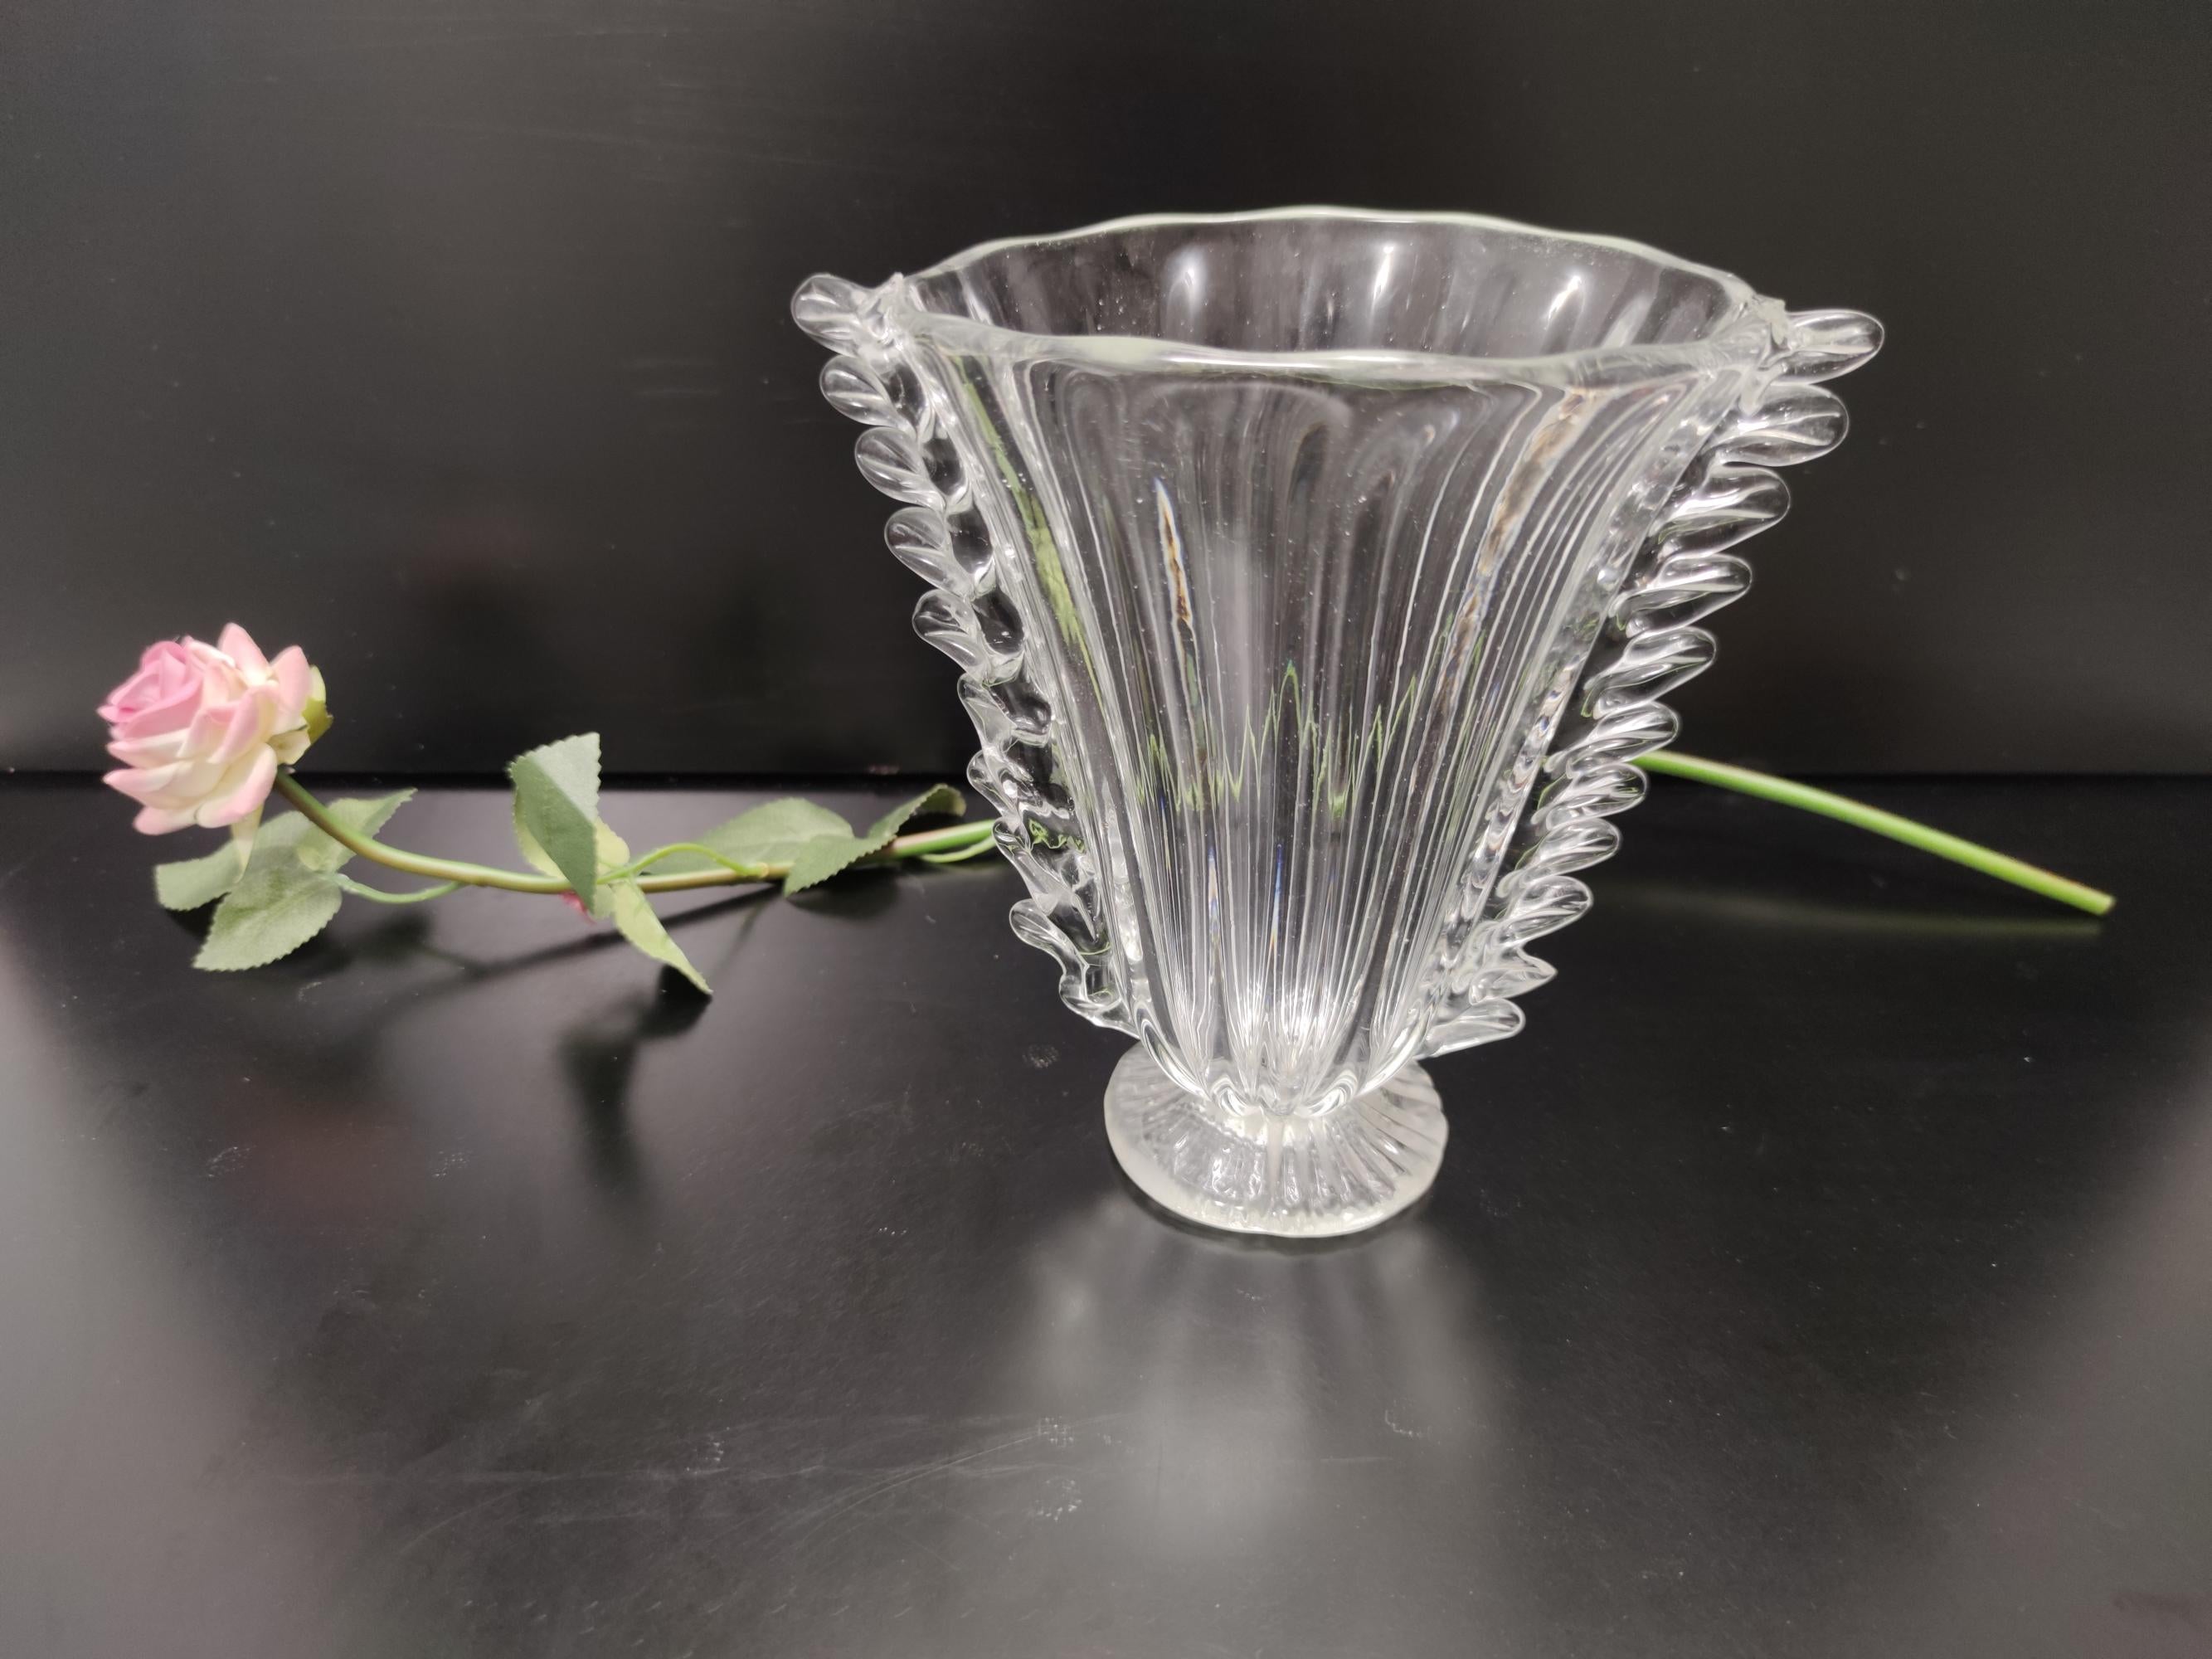 Made in Italy, 1930s - 1940s. 
This vase is made in hand-blown Murano glass.
It is a vintage item, therefore it might show slight traces of use, but it can be considered as in excellent original condition and ready to become a piece in a